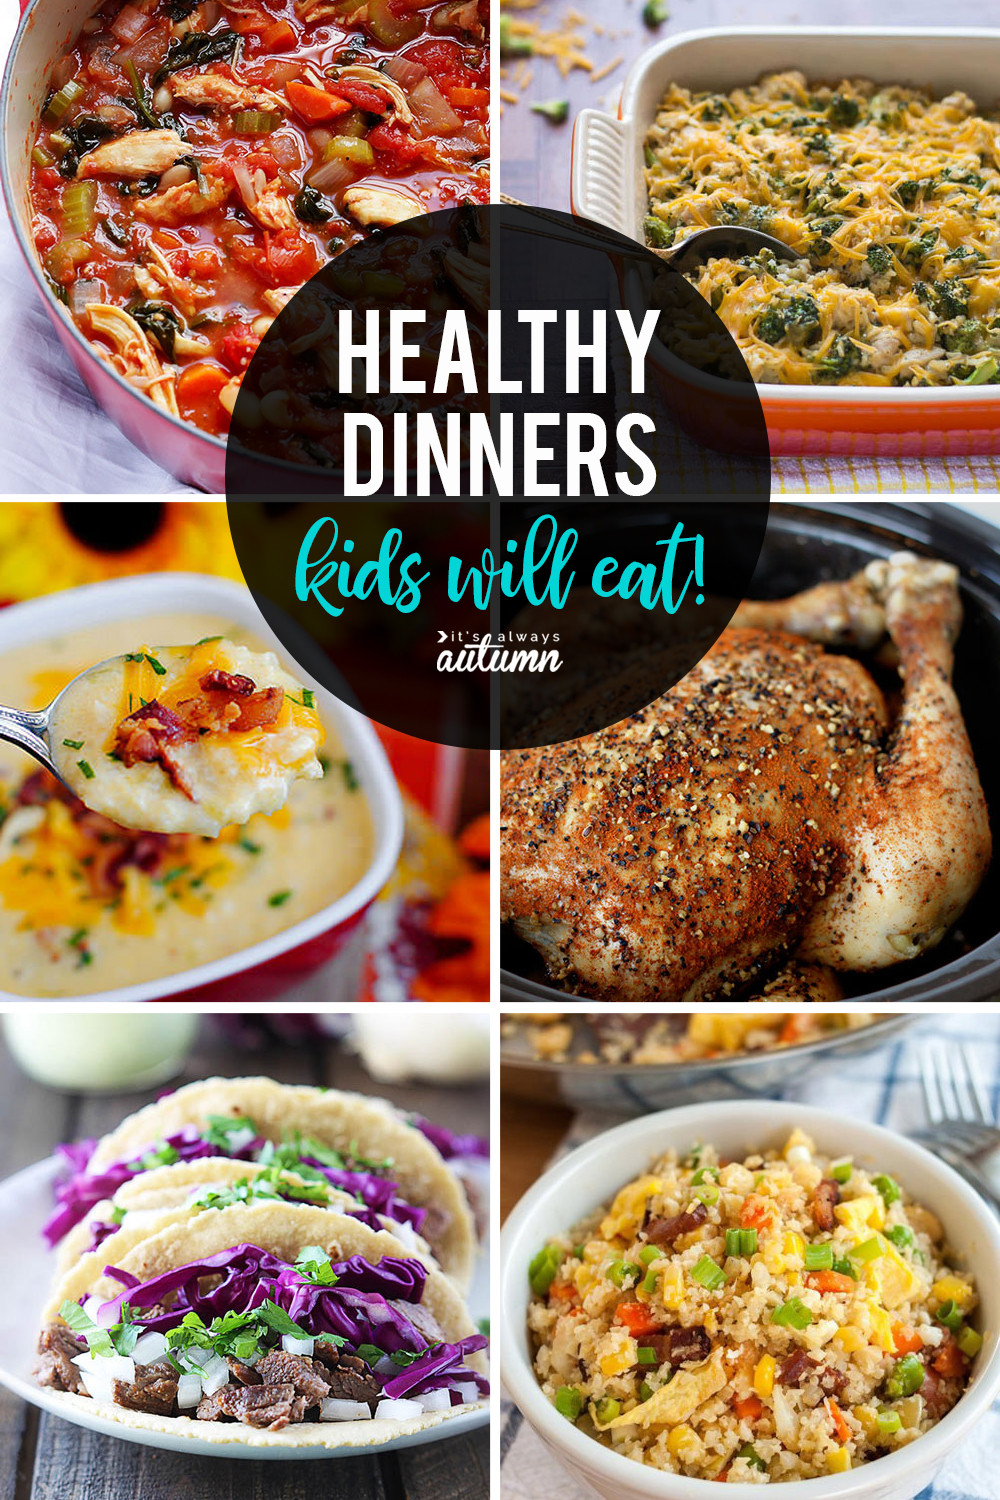 Recipes That Kids Like
 20 healthy easy recipes your kids will actually want to